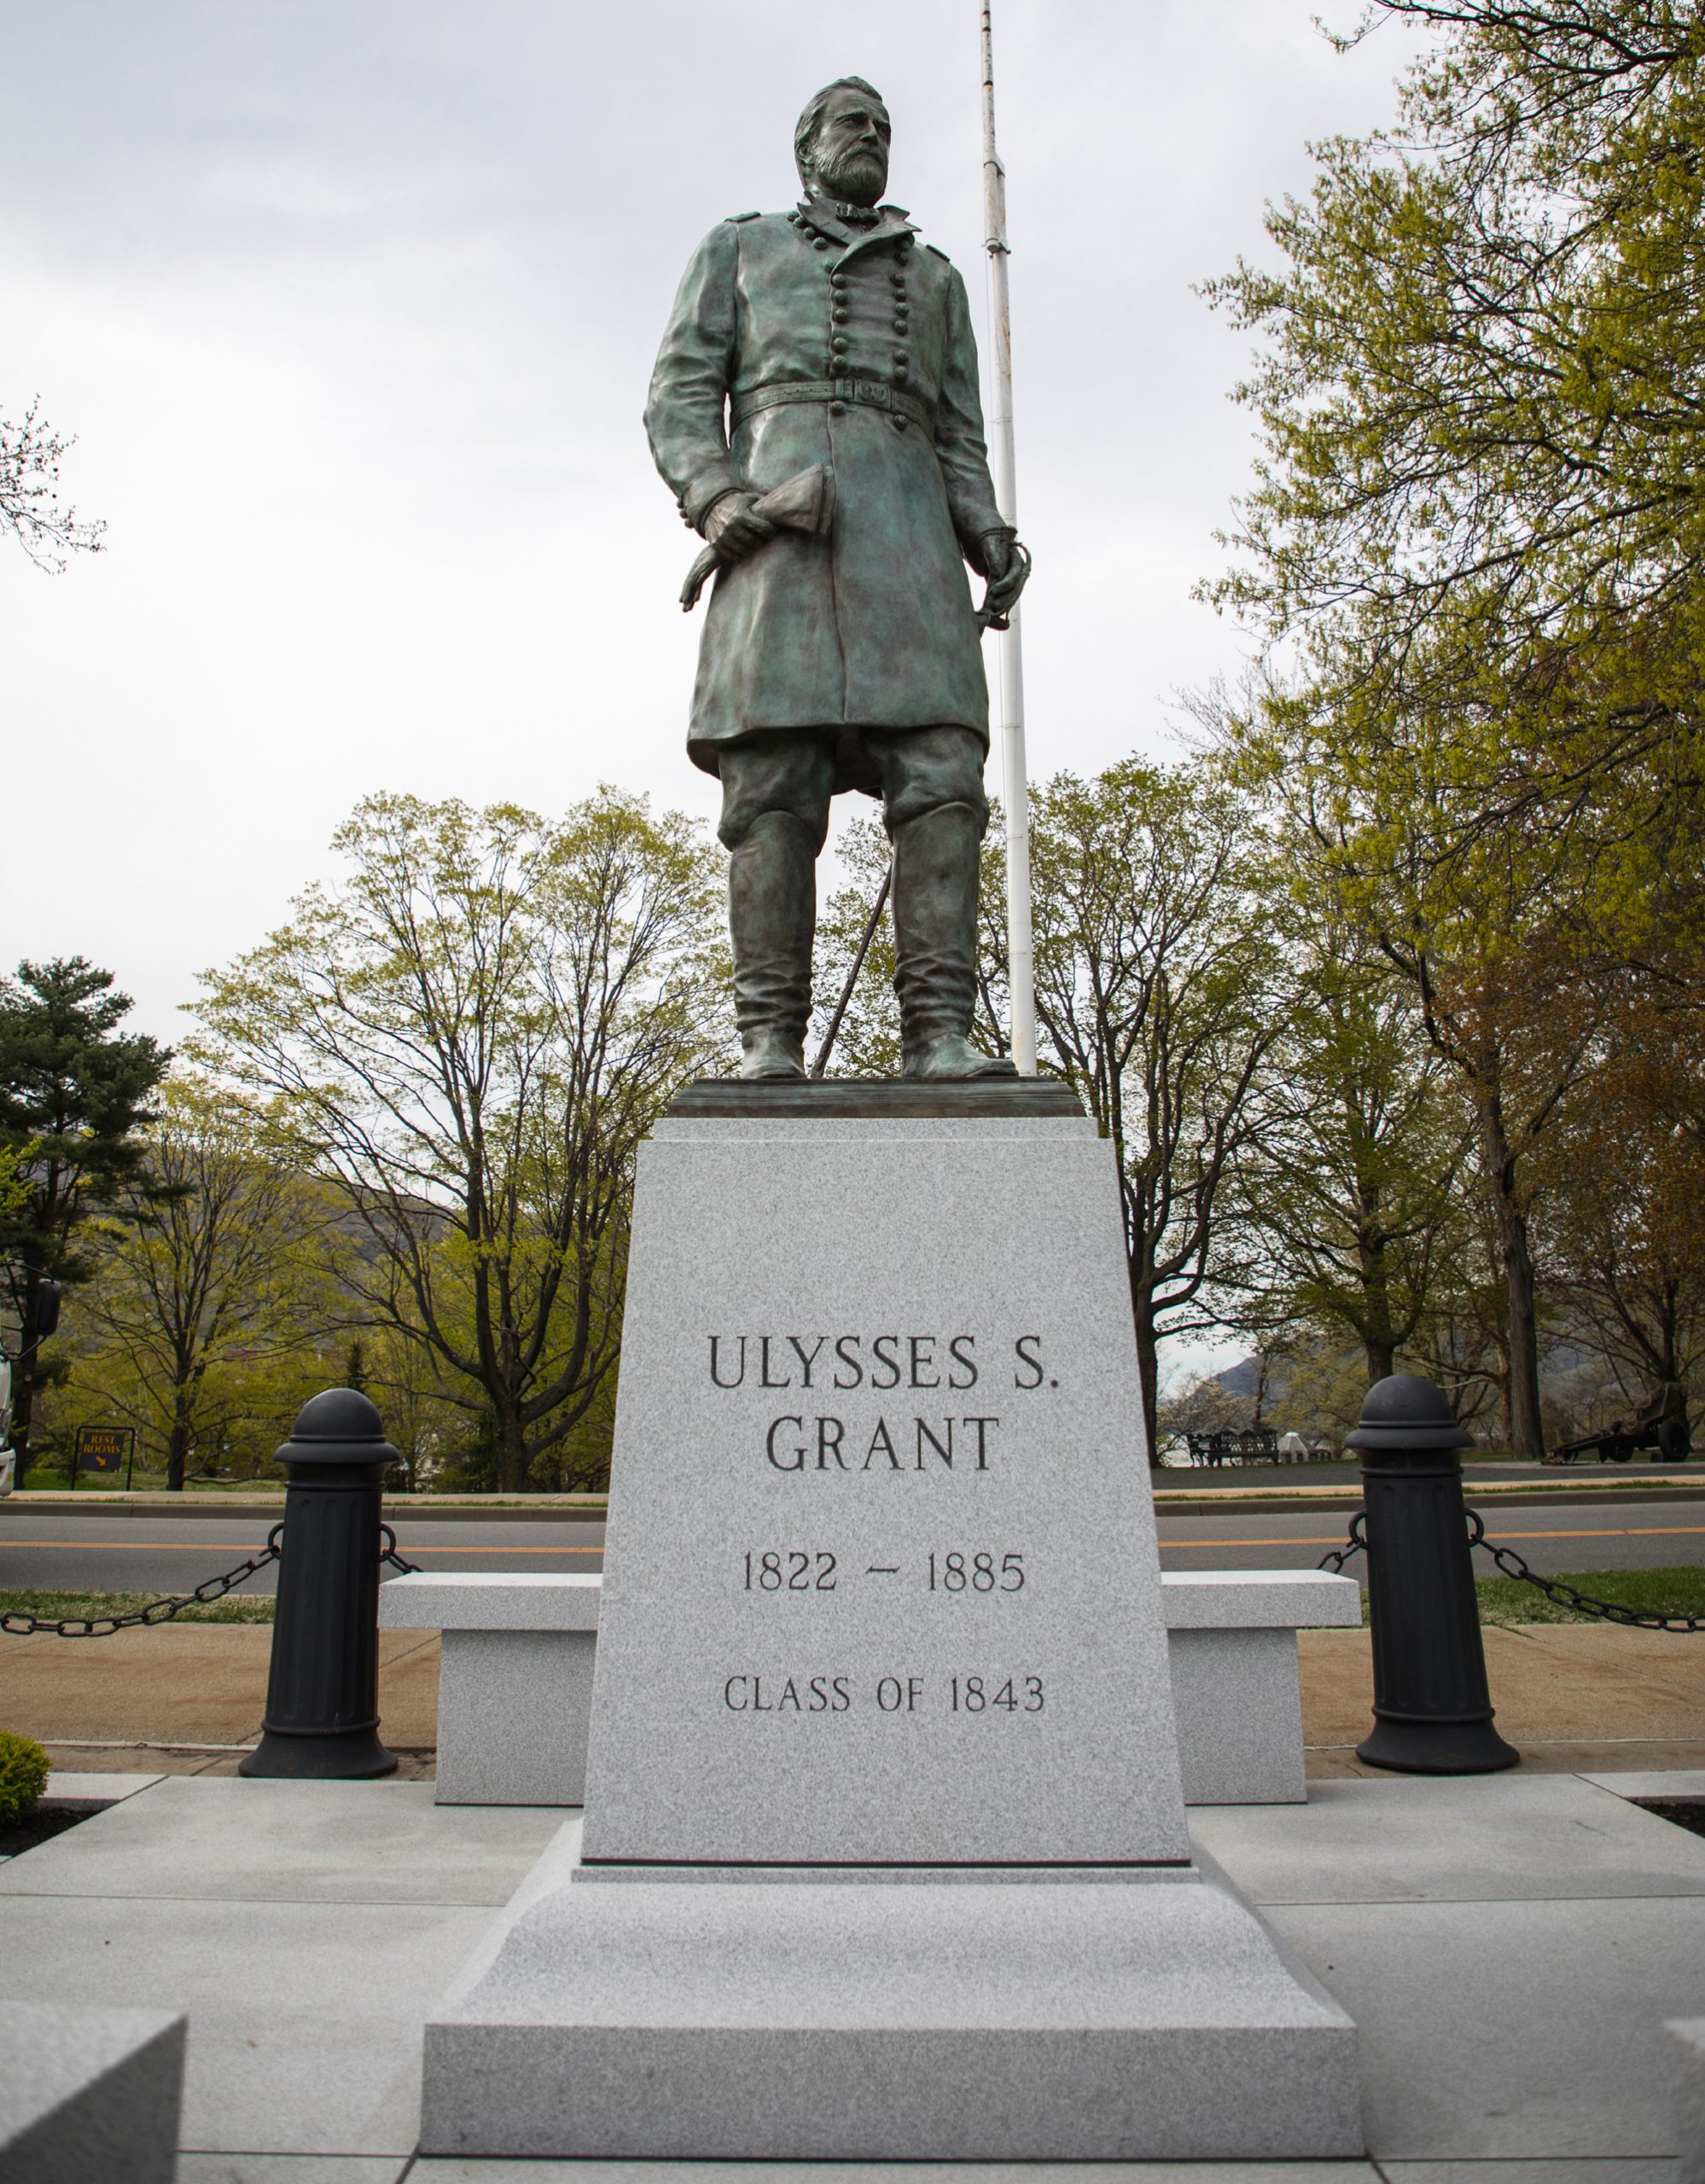 General Ulysses S. Grant Monument, U.S. Military Academy at West Point